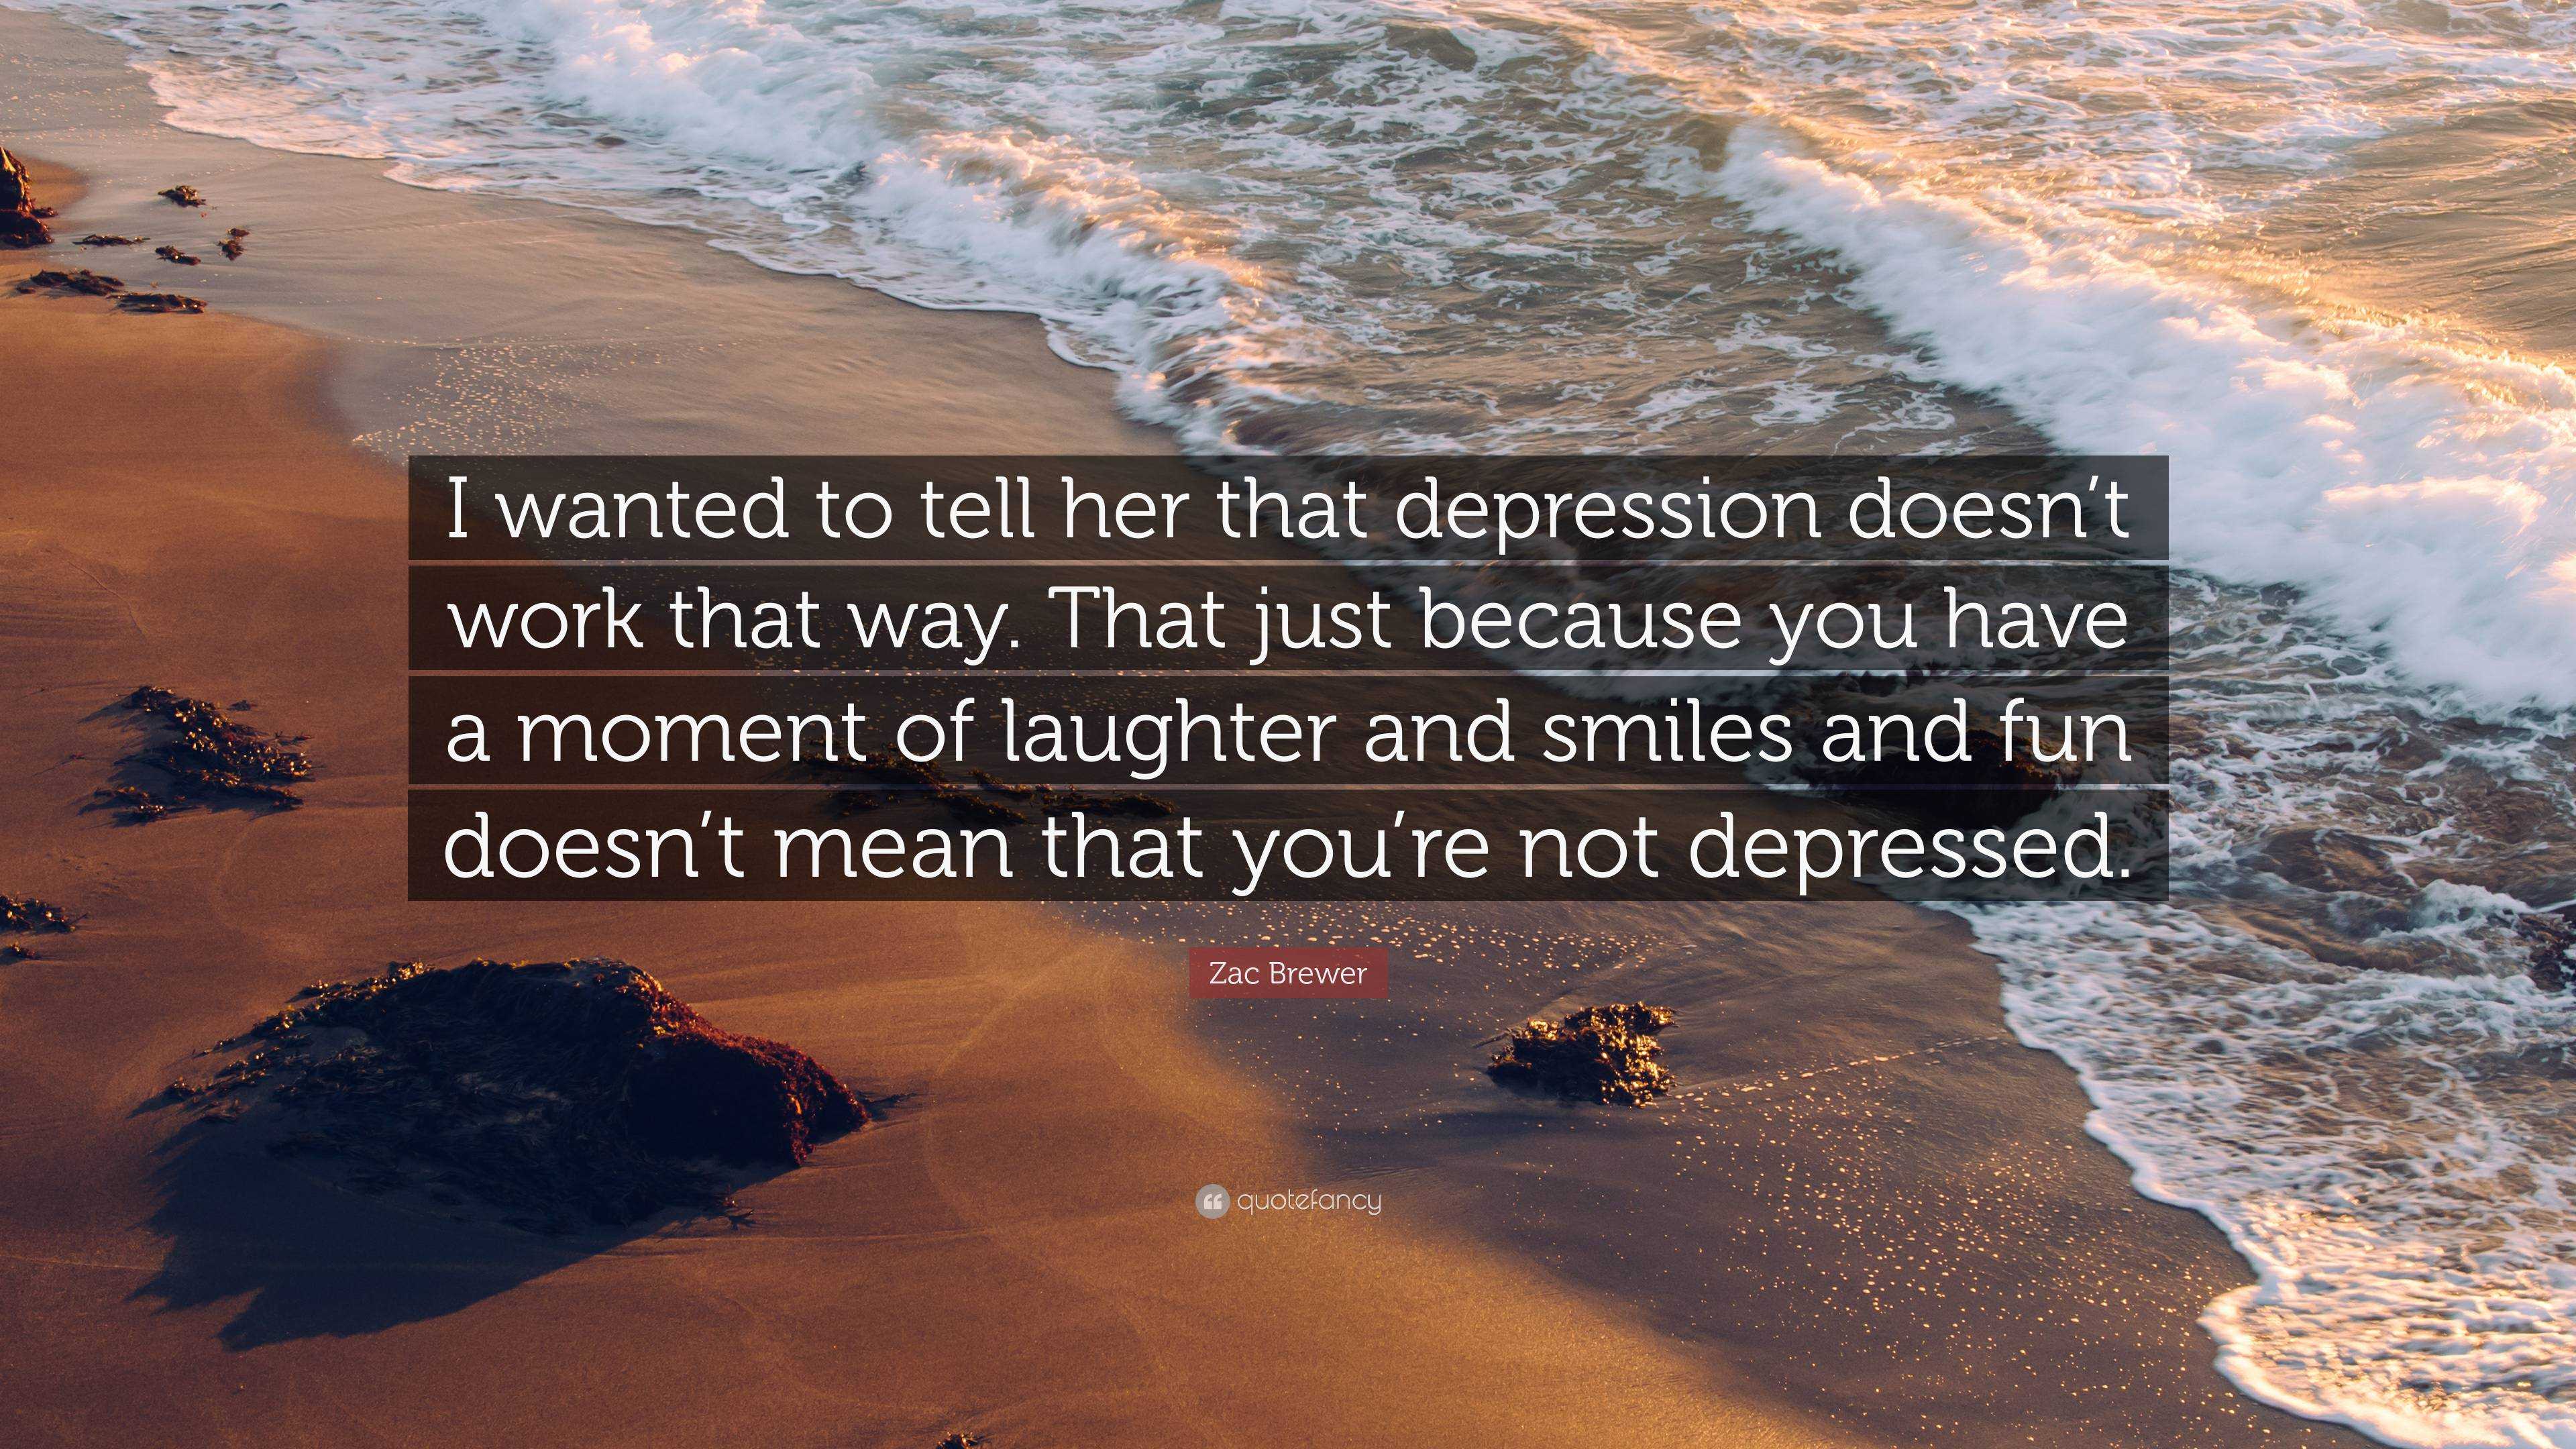 You are not depressed